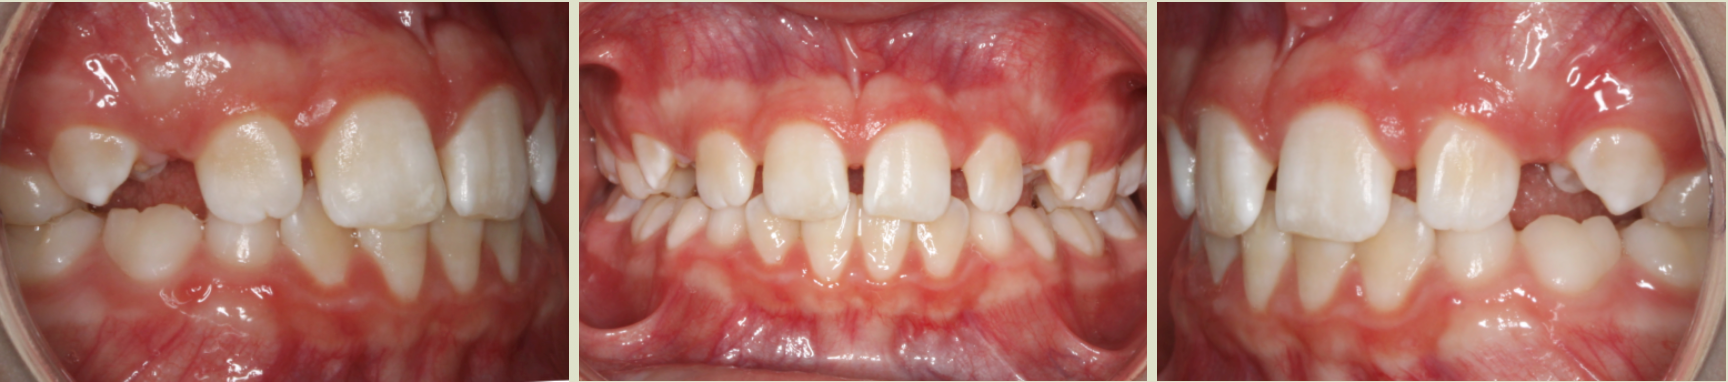 Before photo (front view of teeth): Severe Dental Crowding - Palate Expander & Braces, Case Study #5